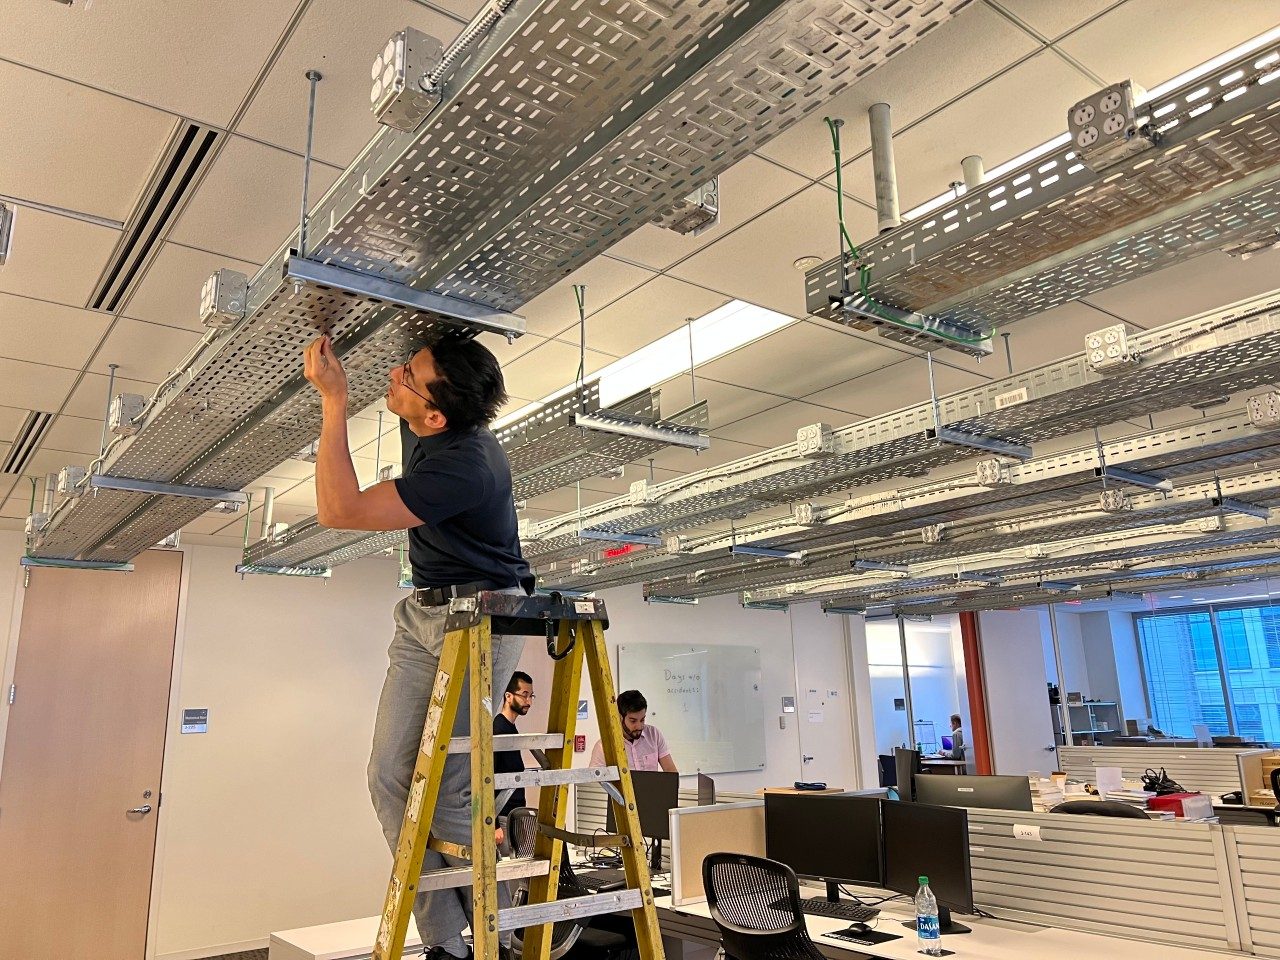 CCI xG Testbed Director Aloizio P. DaSilva installing Power Delivery Units (PDUs), which allow researchers to remotely turn radios on and off.